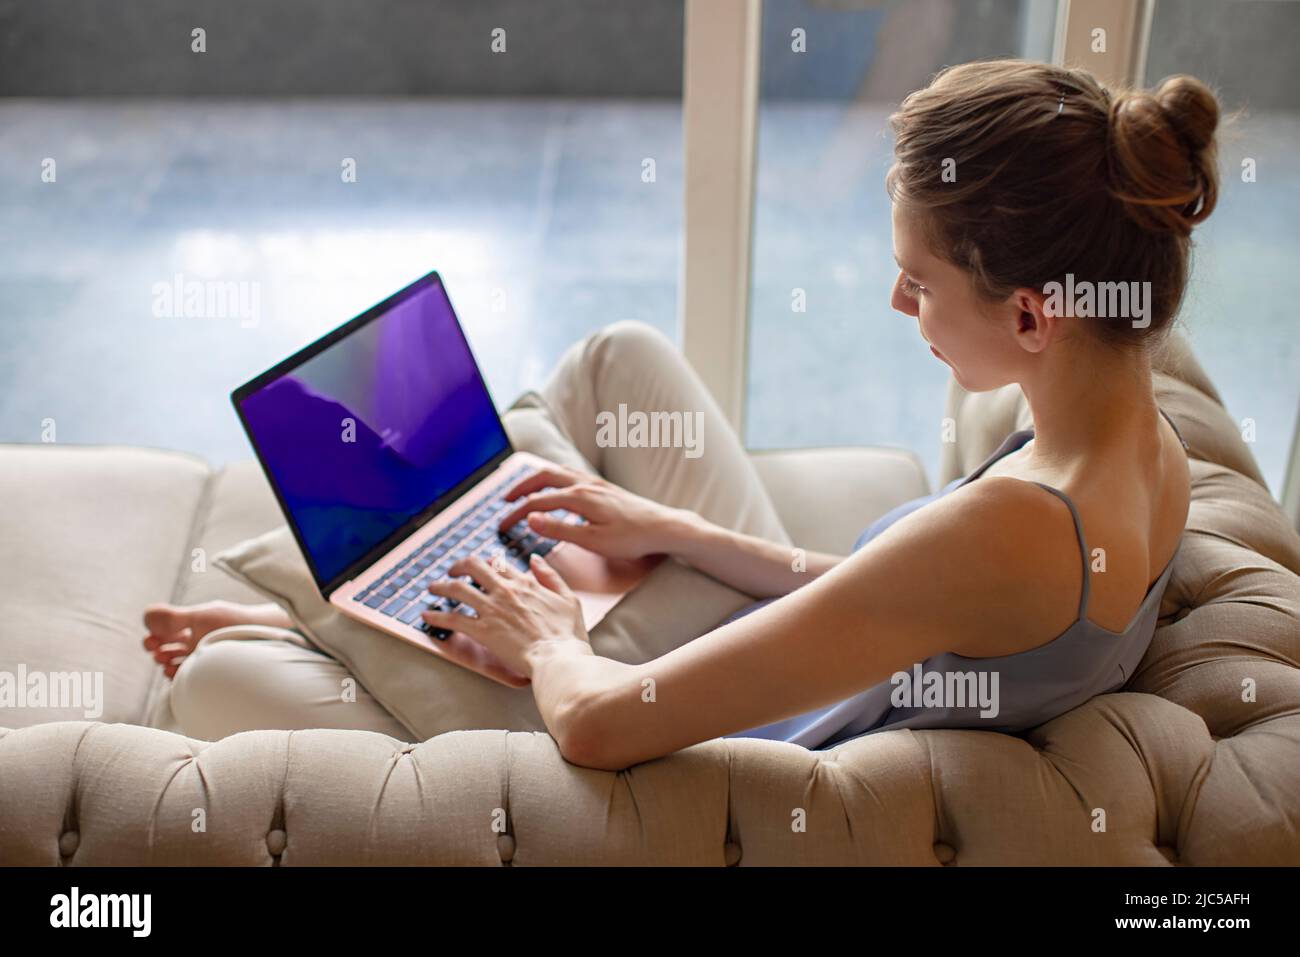 Young woman sitting on couch and working on a laptop Stock Photo